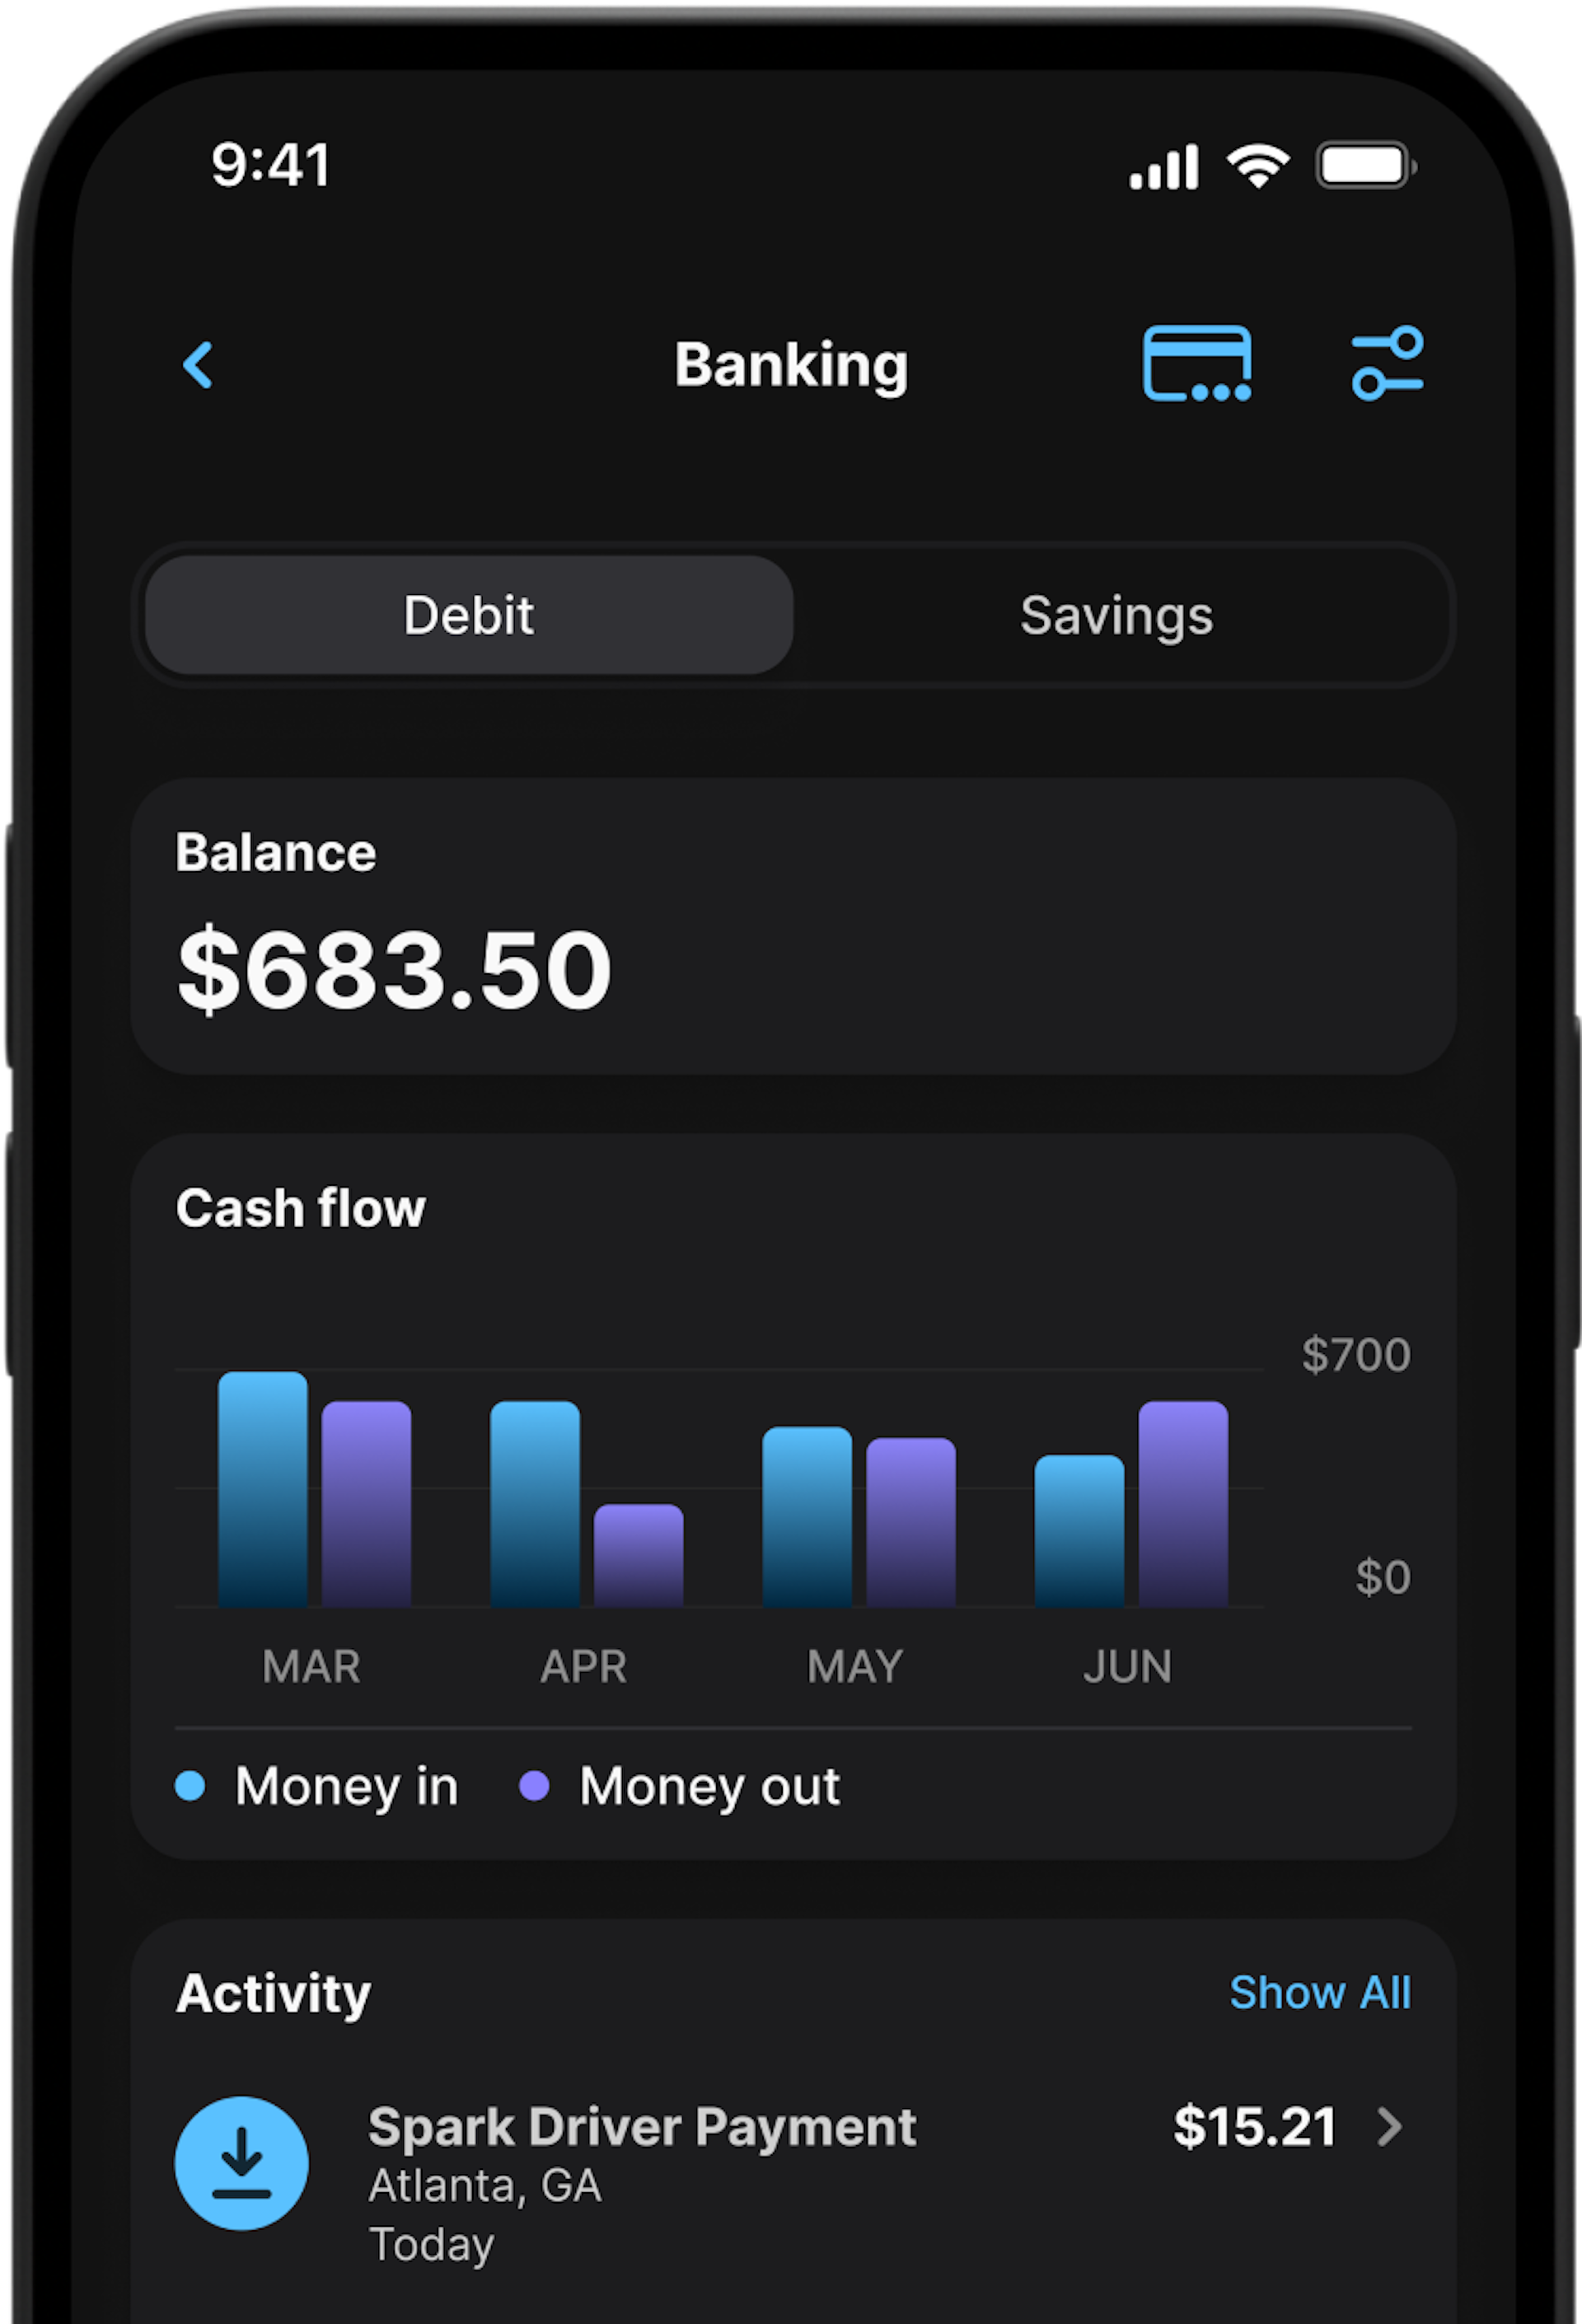 The One app, showing banking activity that includes instant Spark Driver trip earnings deposited into a One debit account